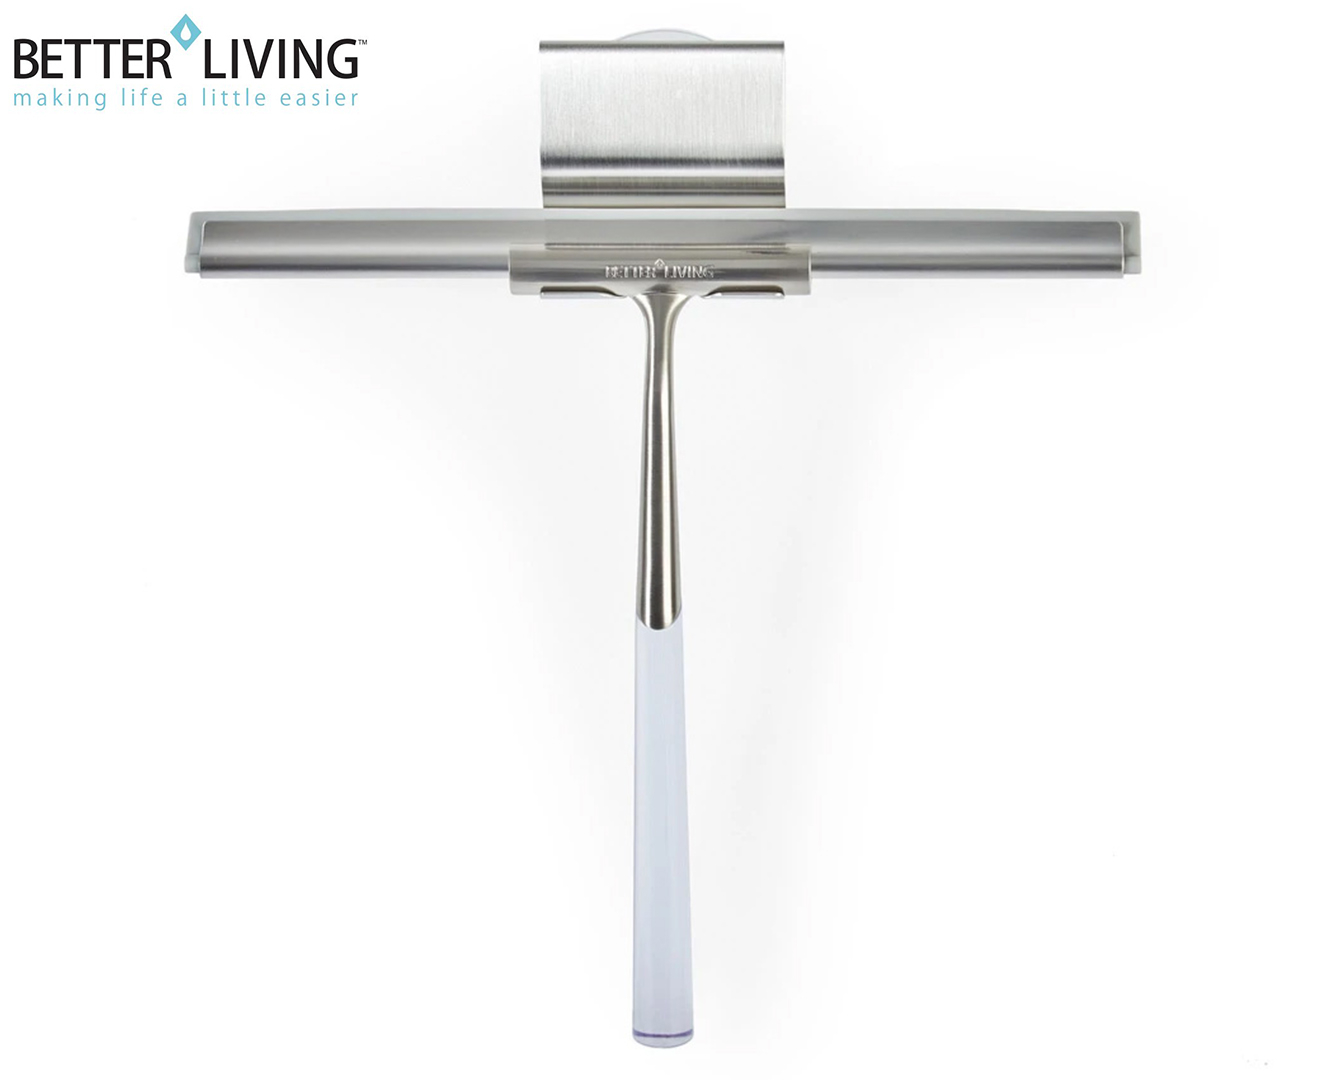 Shower Squeegee Effective Stainless Steel With Adhesive Hook Holder Chrome Glass 